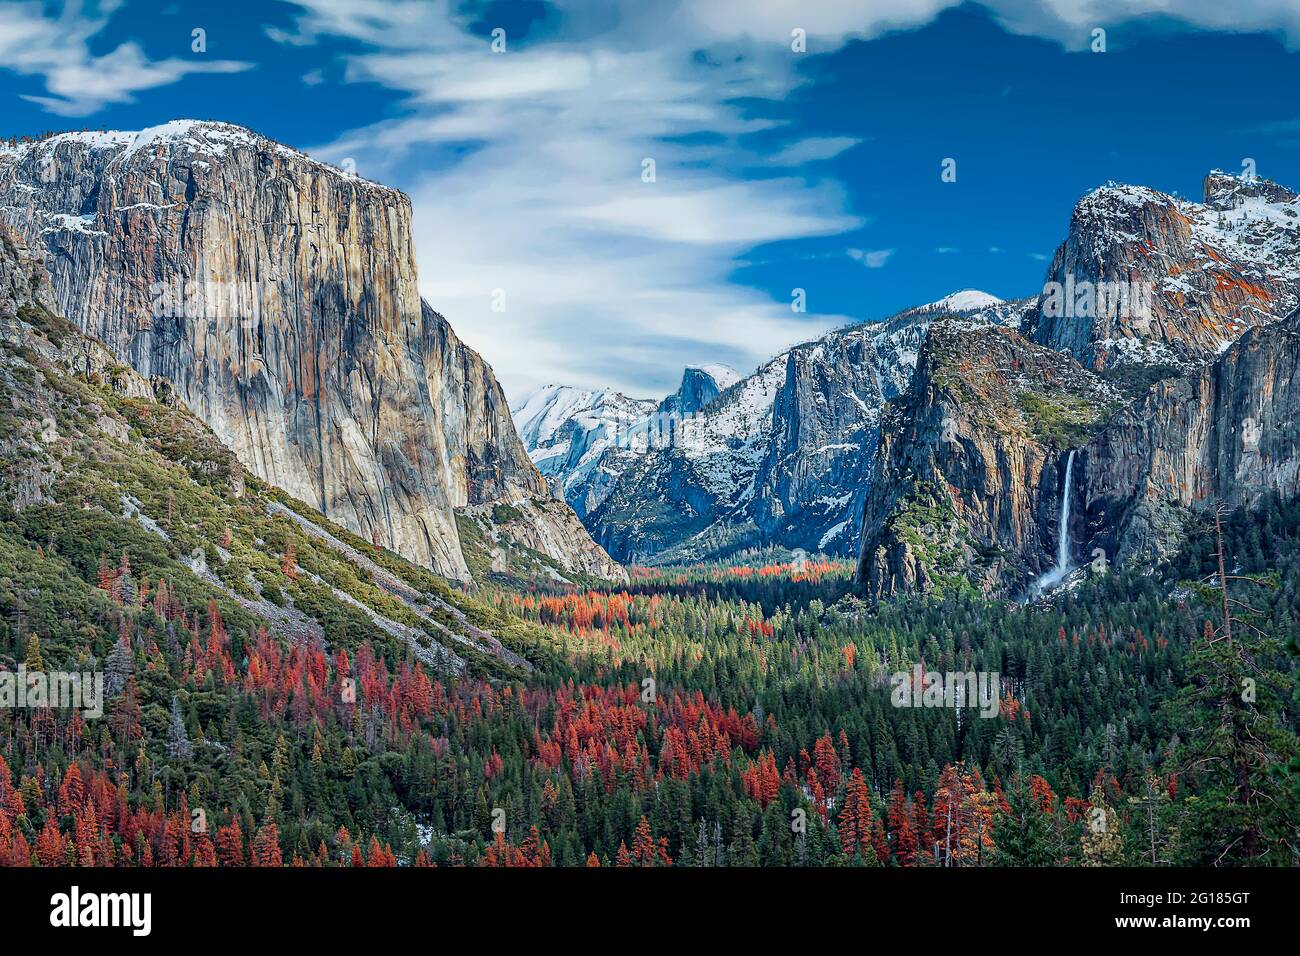 Yosemite National Park in the western Sierra Nevada mountains Stock Photo